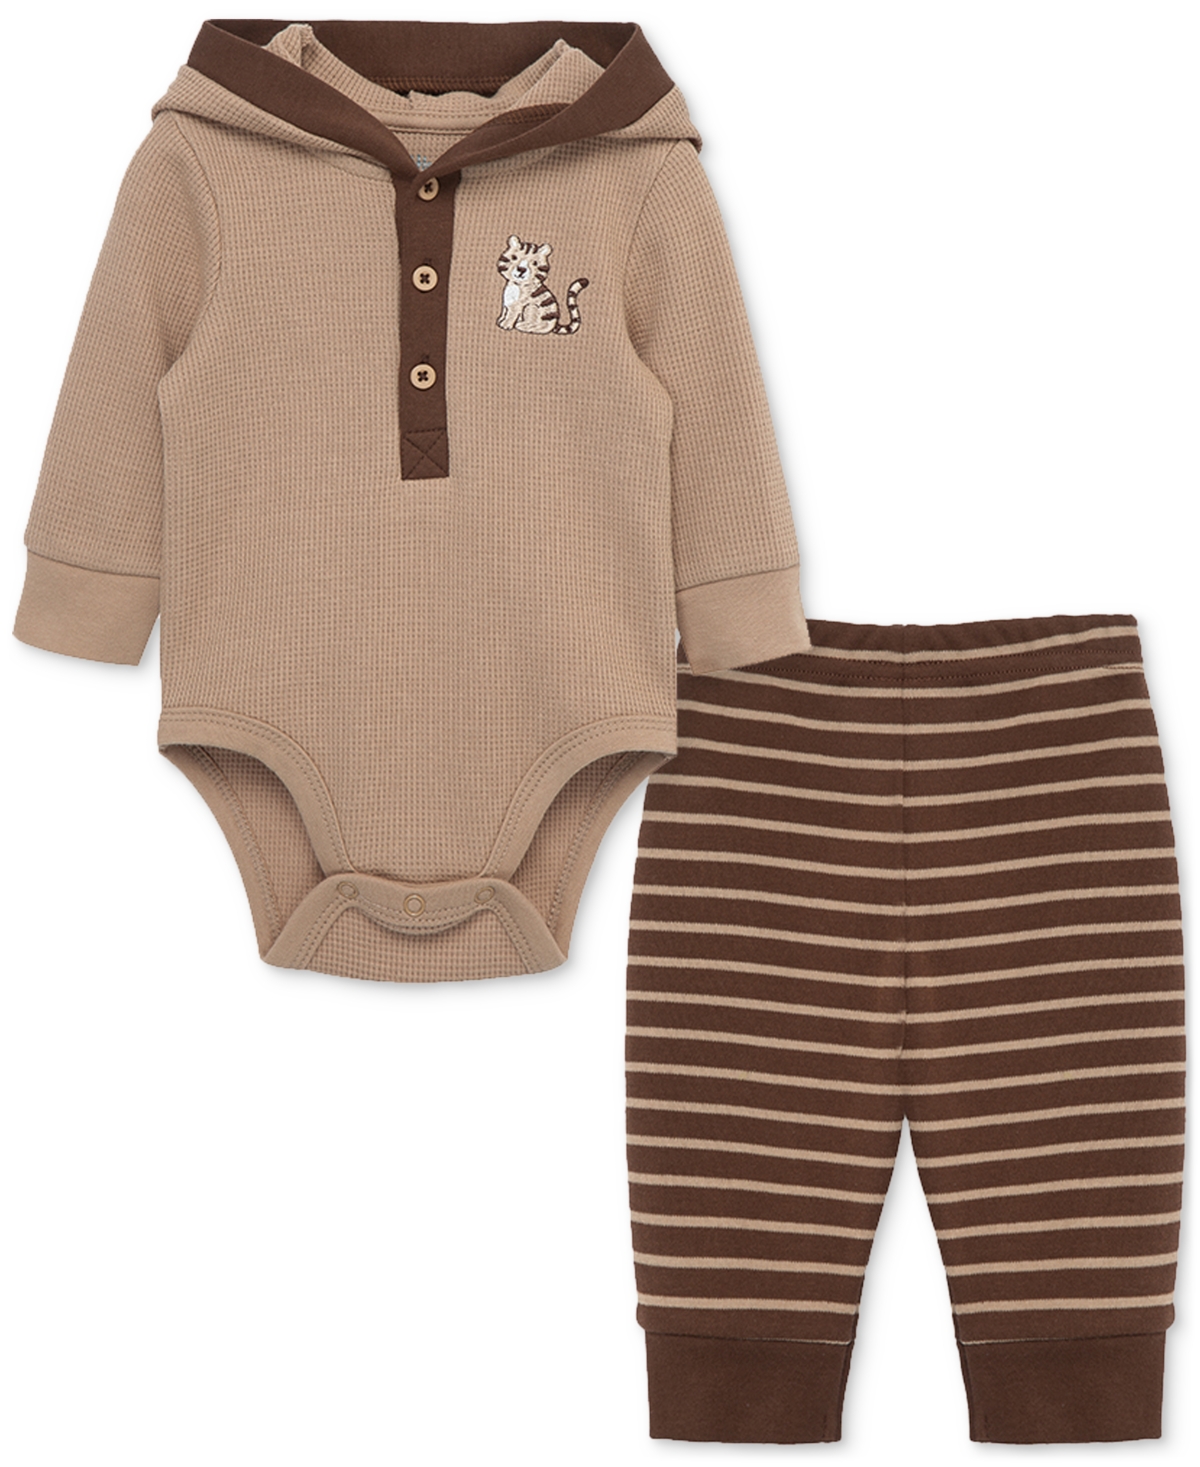 Little Me Baby Boys Cotton Tiger Bodysuit And Striped Pants, 2 Piece Set In Brown